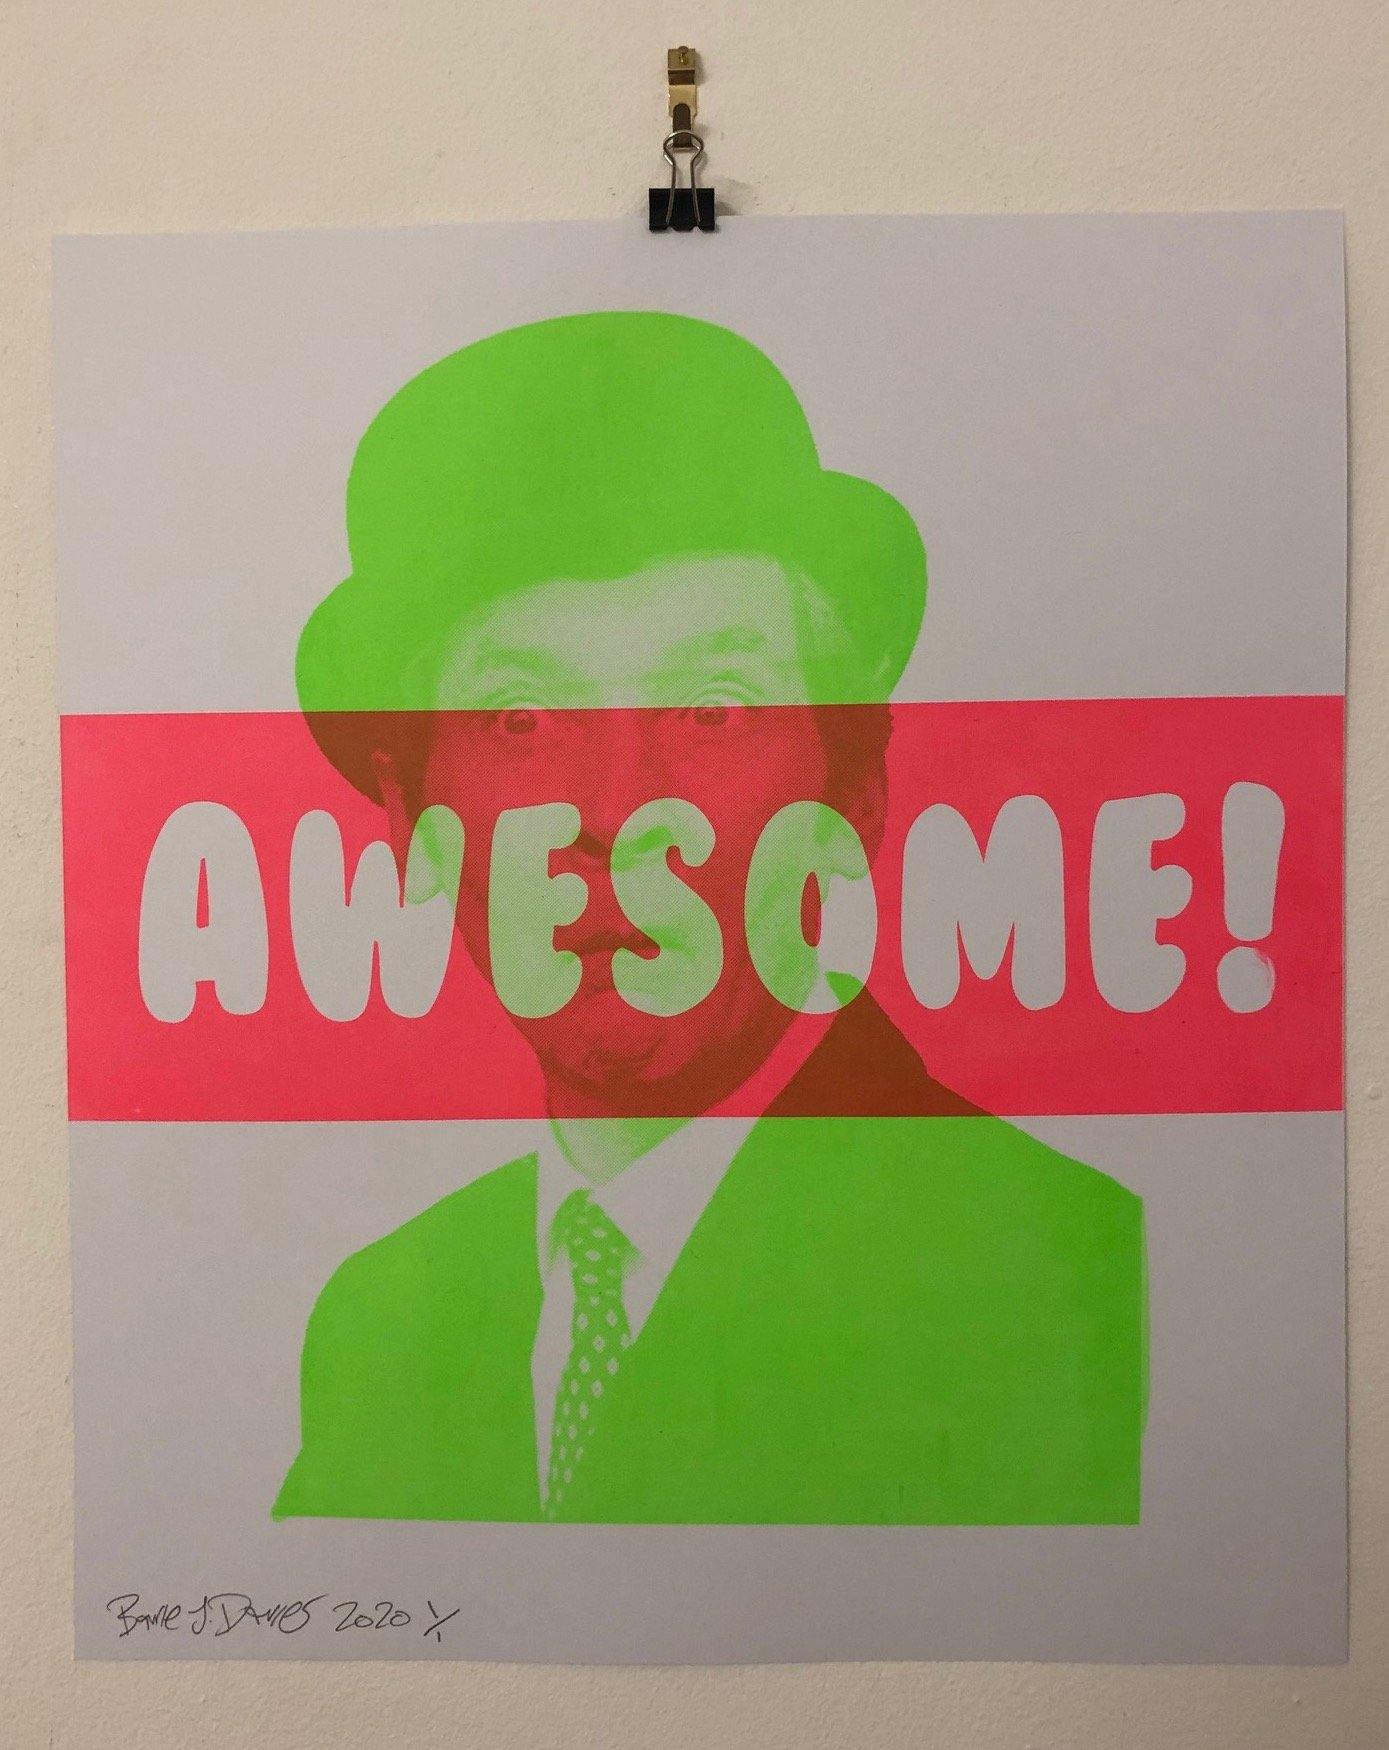 Awesome Mistake Print - BARRIE J DAVIES IS AN ARTIST